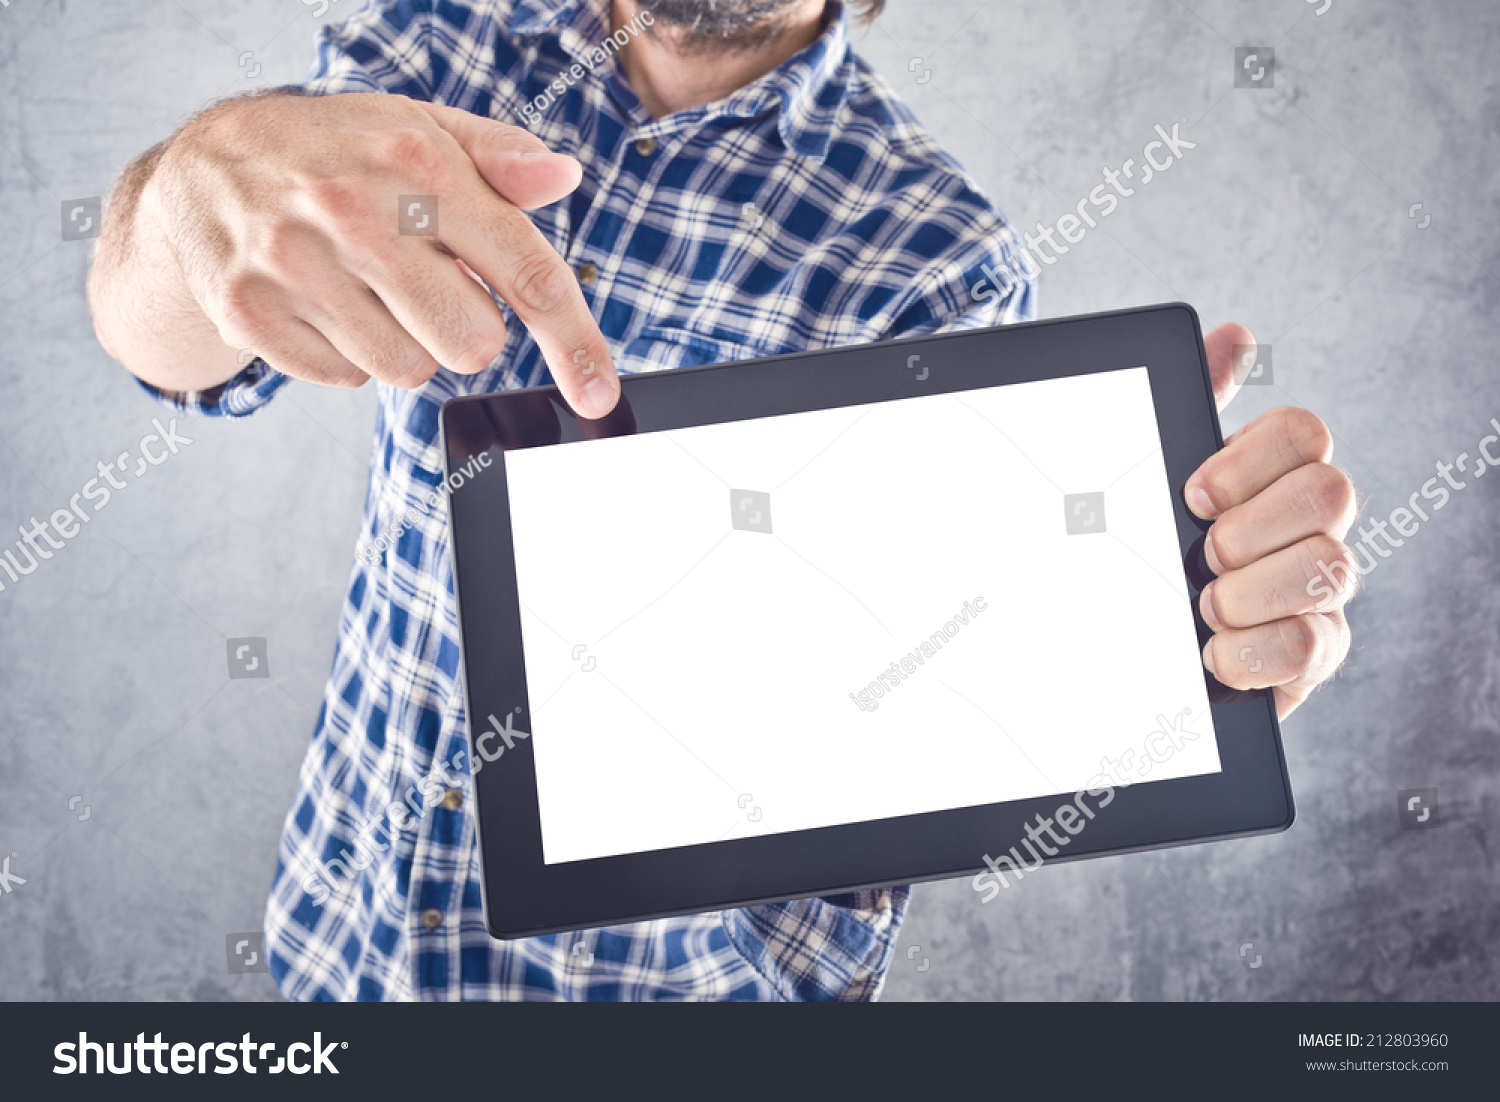 Casual man pointing to 10 inch display of digital tablet computer as copy space for your message or design. #212803960